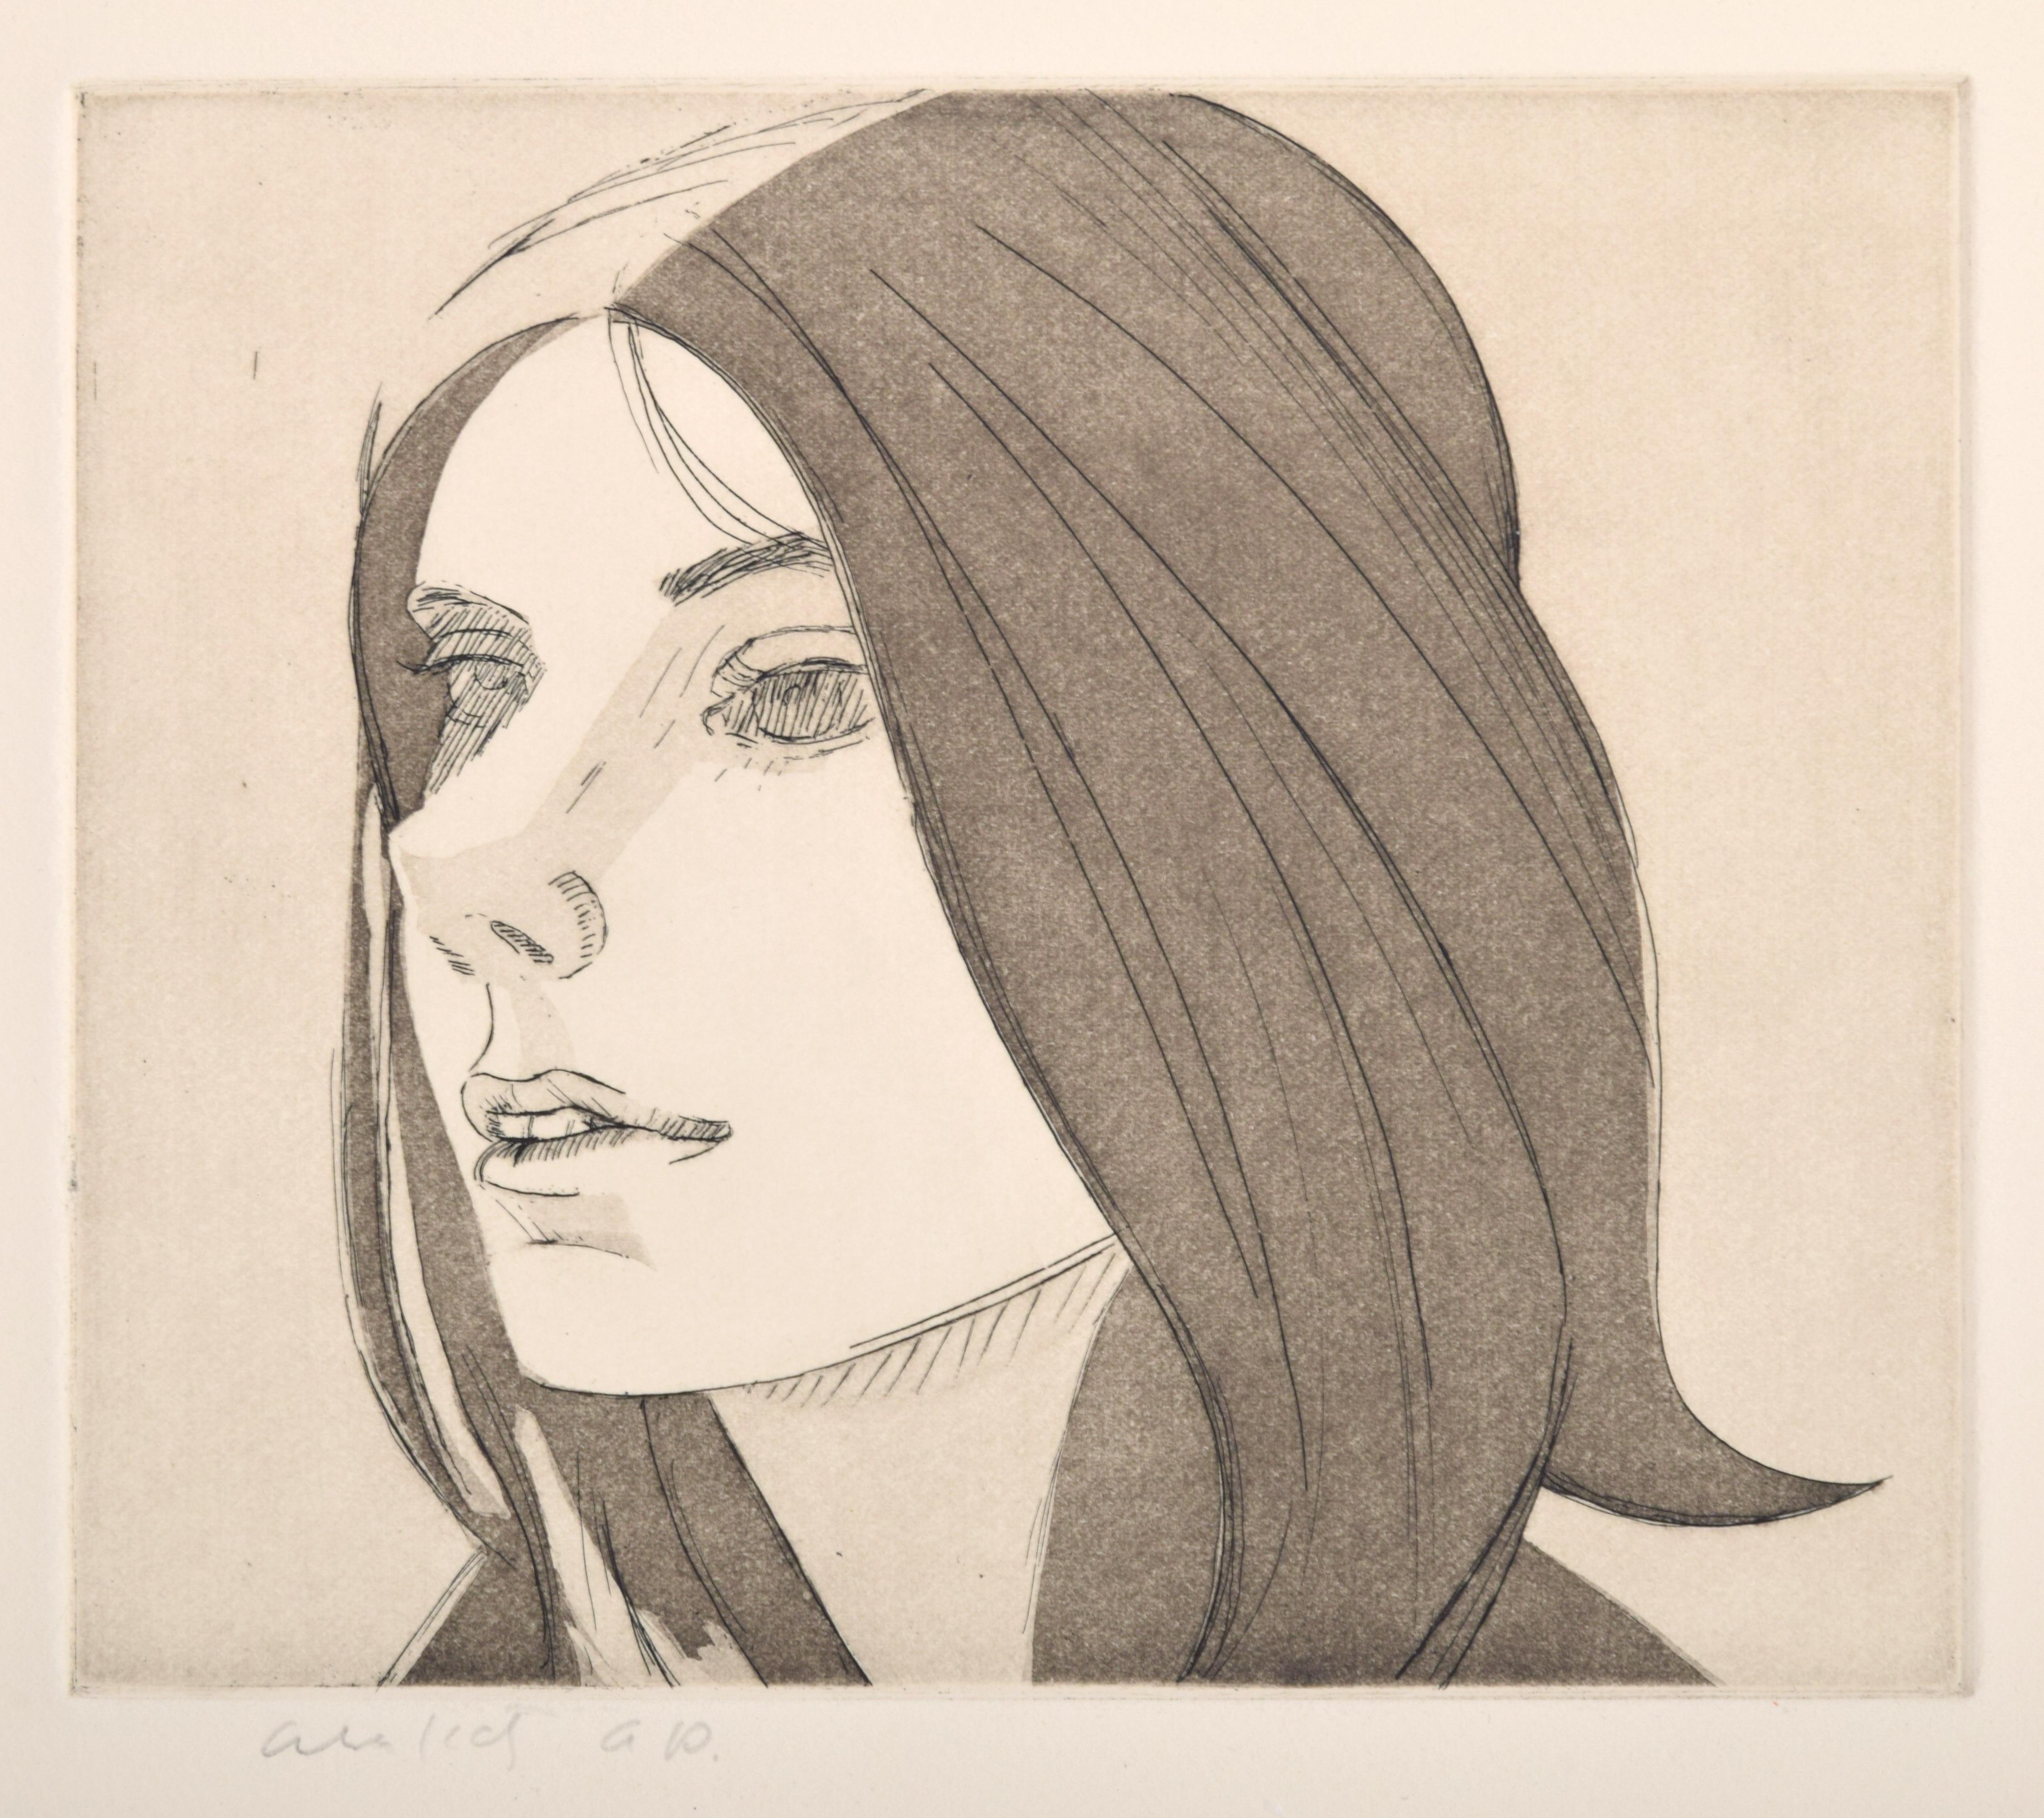 Additional Information: Work is titled “Small Head (Second State).” Provenance: Brooke Alexander Gallery, New York, New York.

Marking(s); notes: signed; A.P. for the edition of 20; 1972

Country of origin; materials: USA; etching and aquatint on